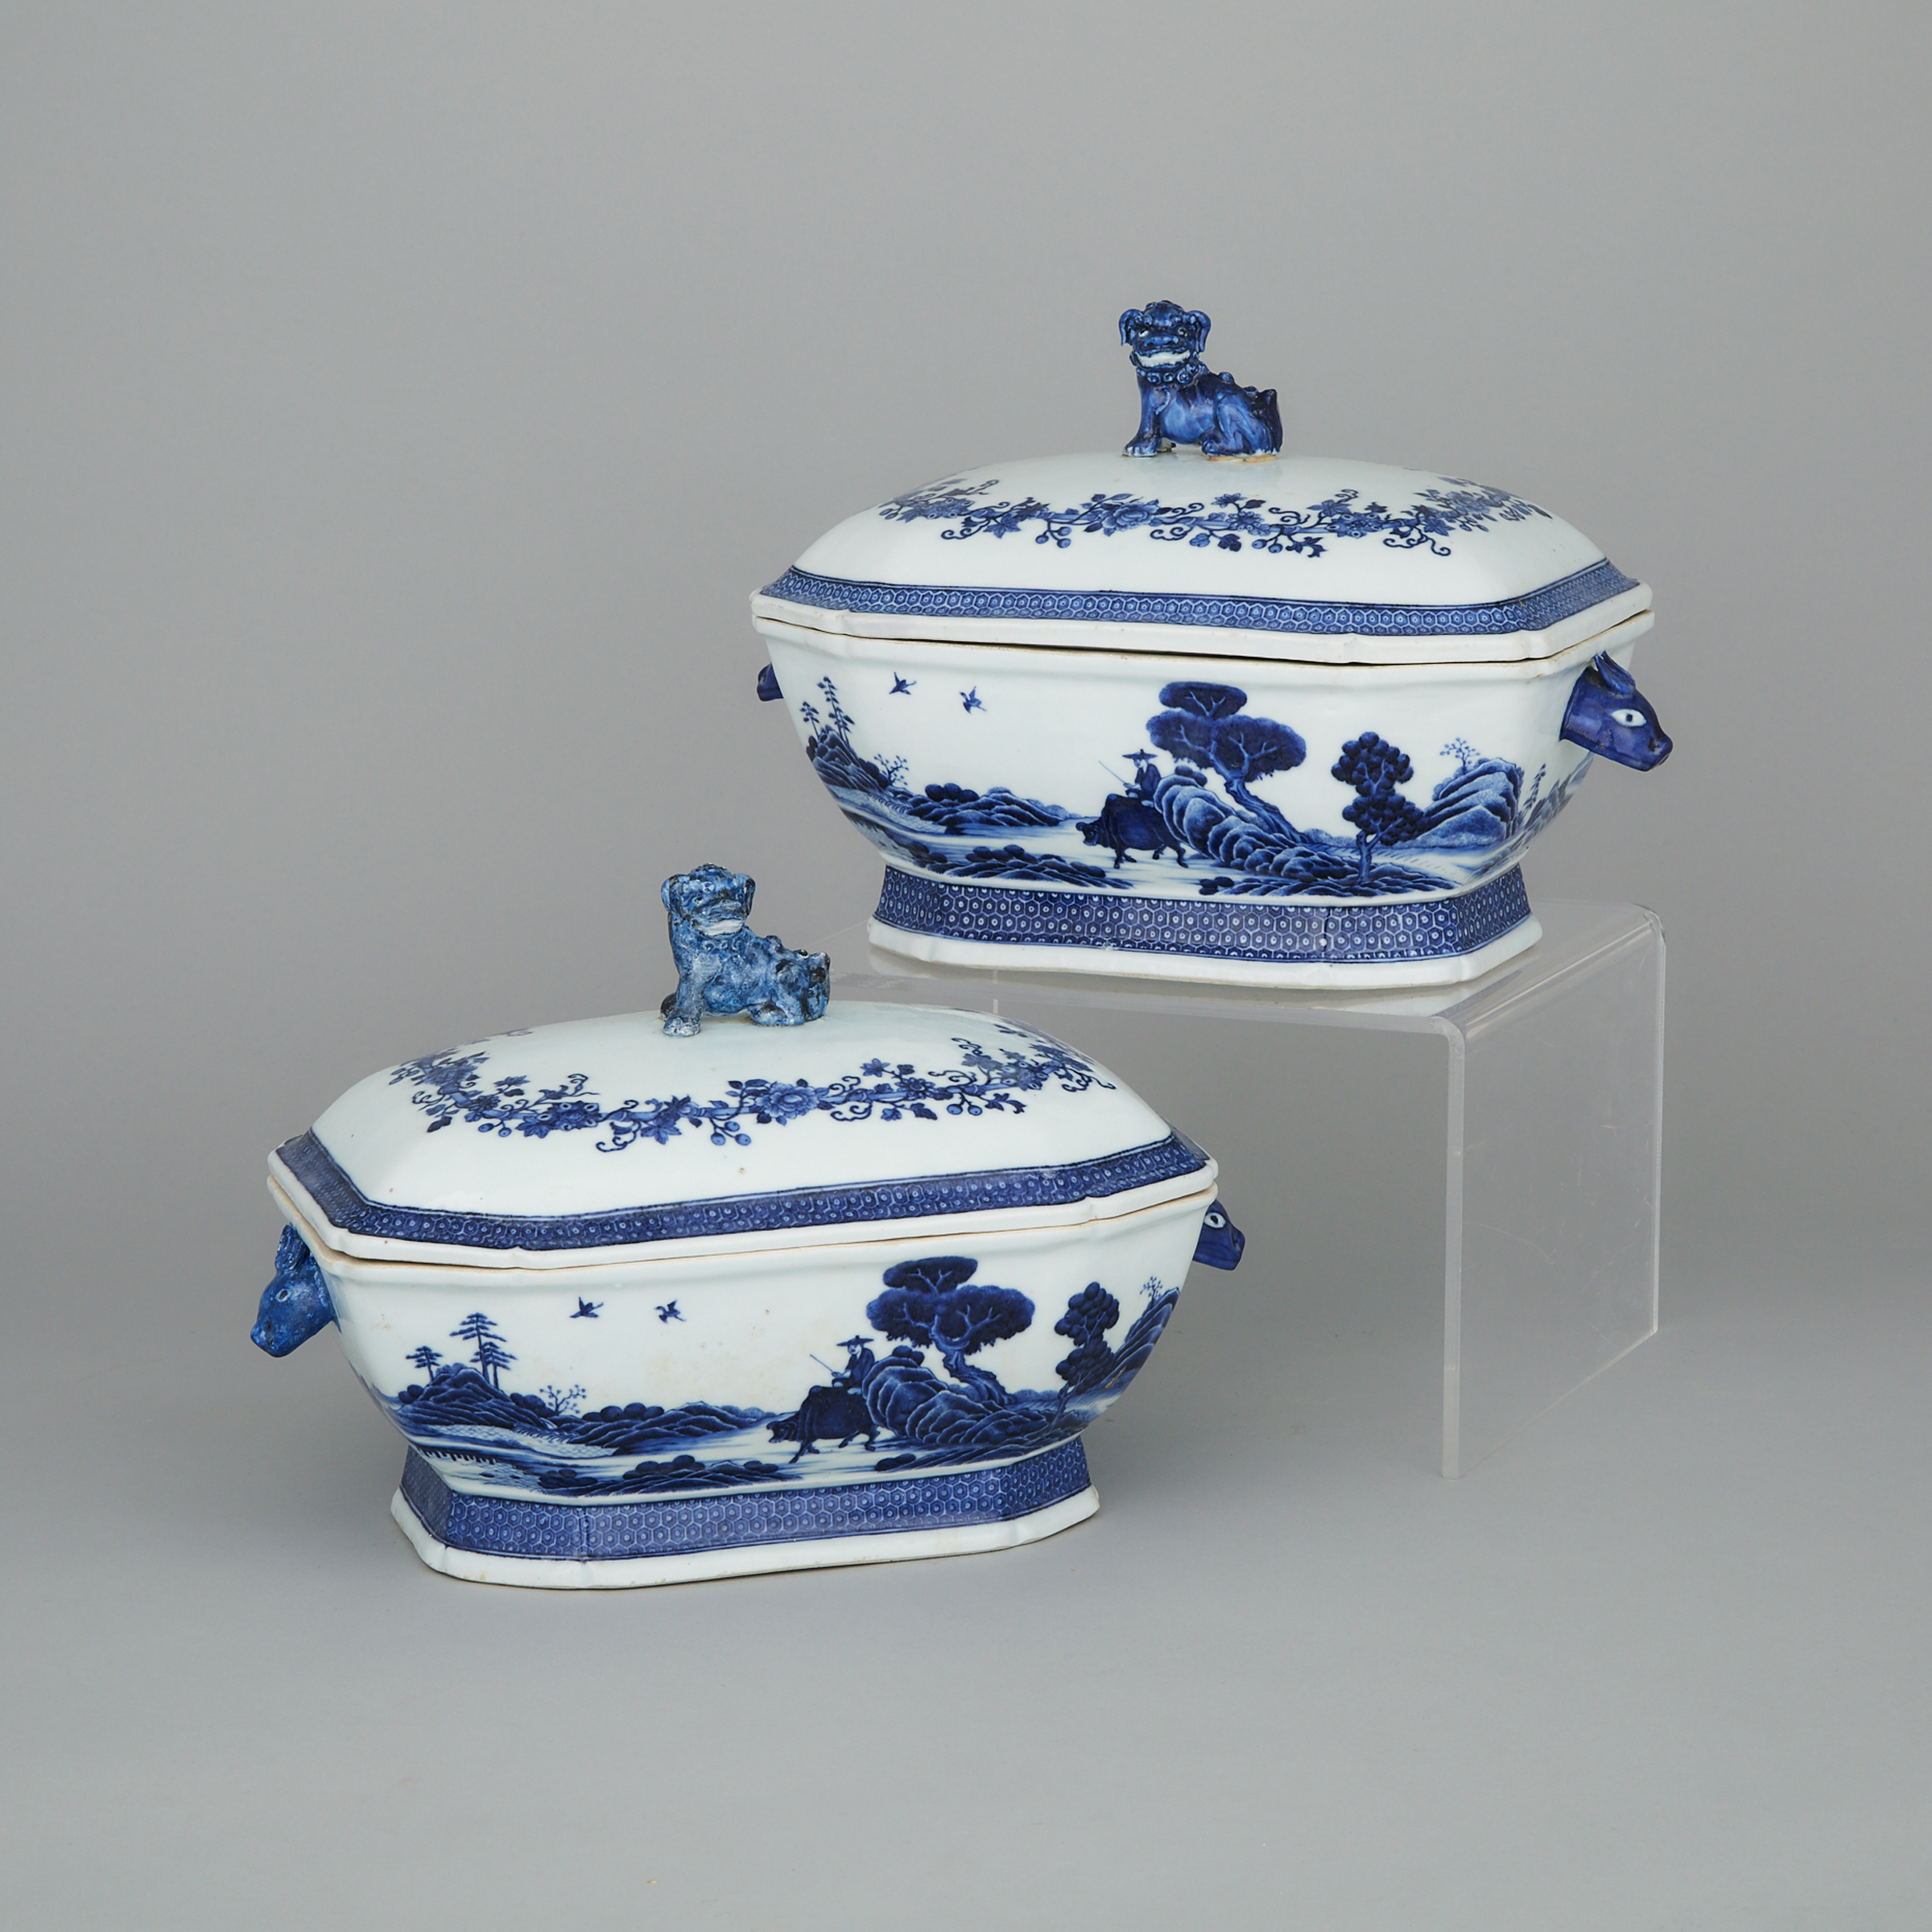 A Pair of of Blue and White Export Tureens, 19th Century